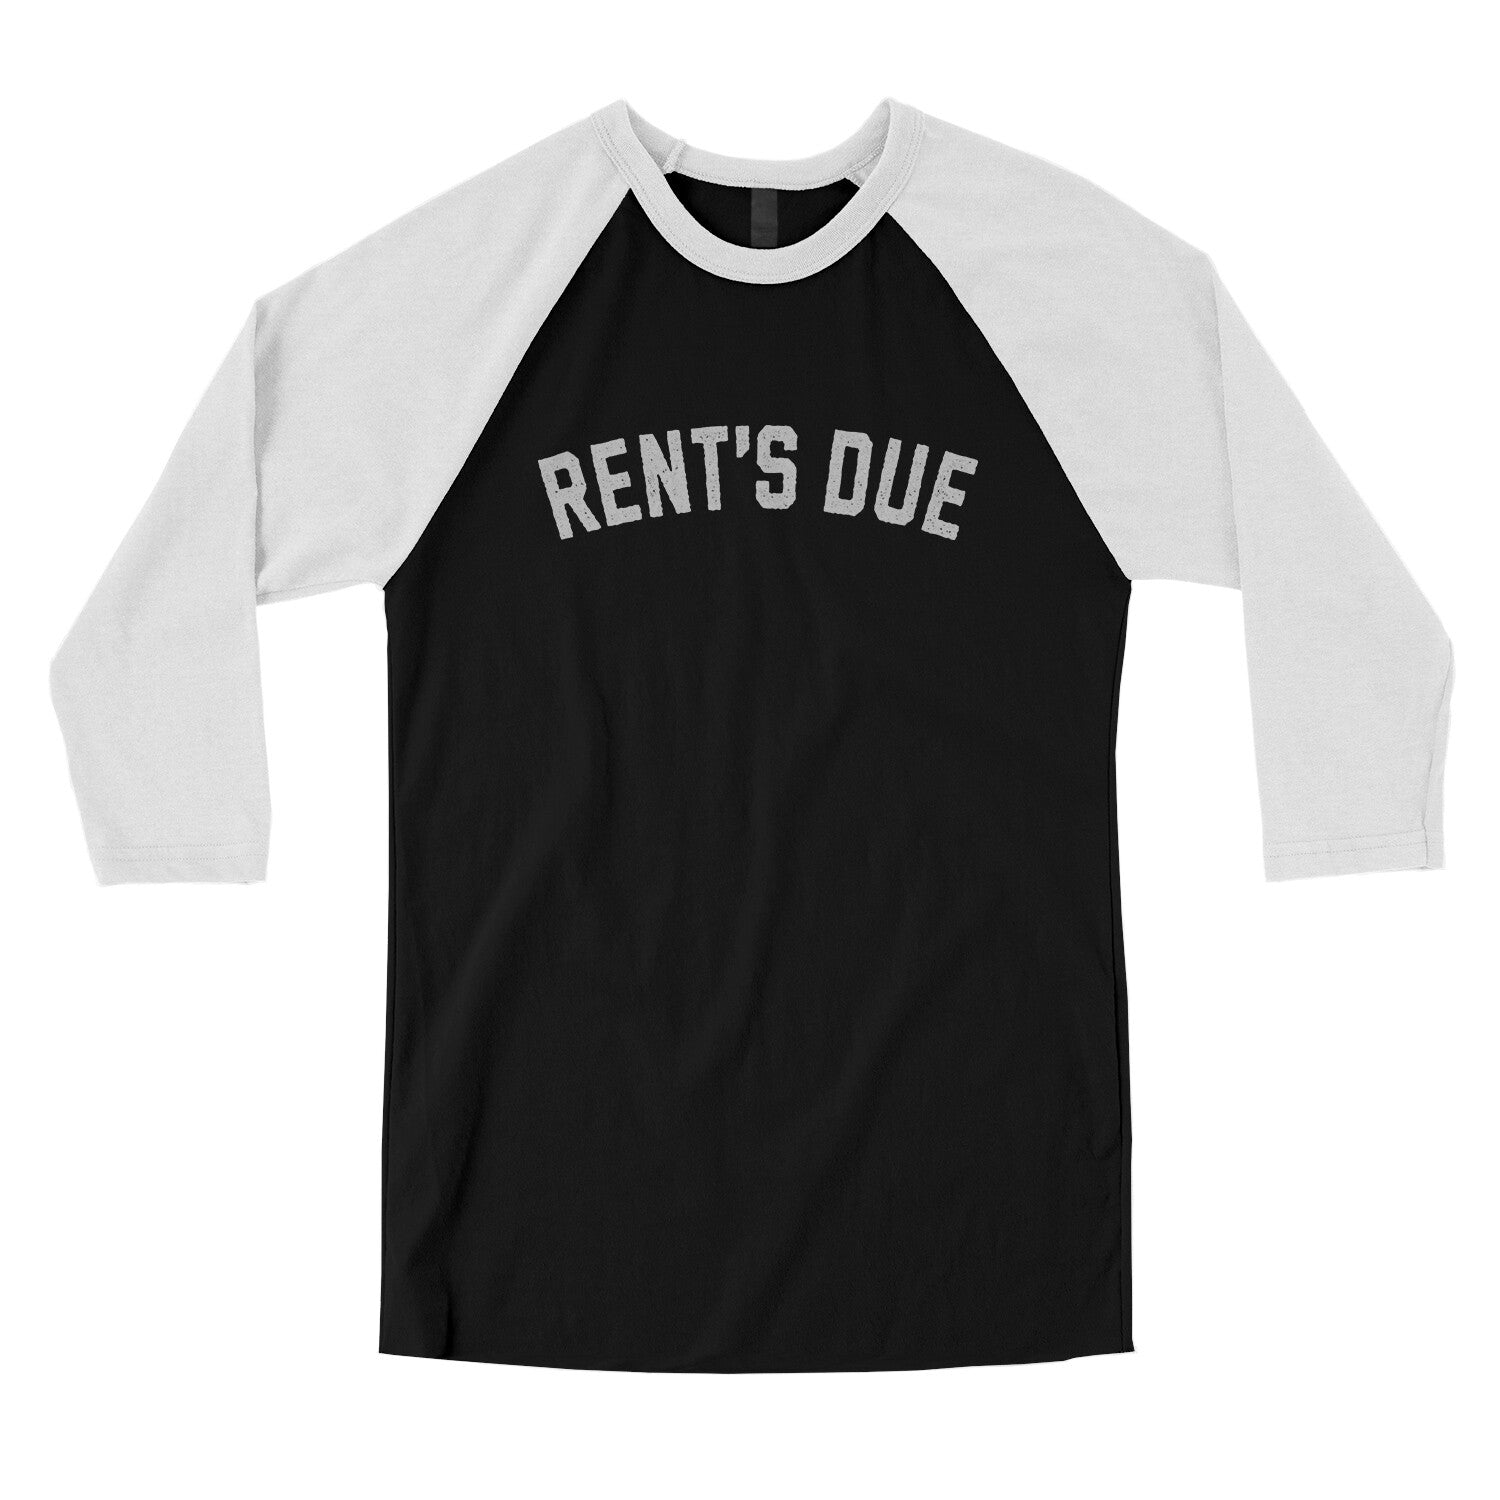 Rent's Due in Black with White Color